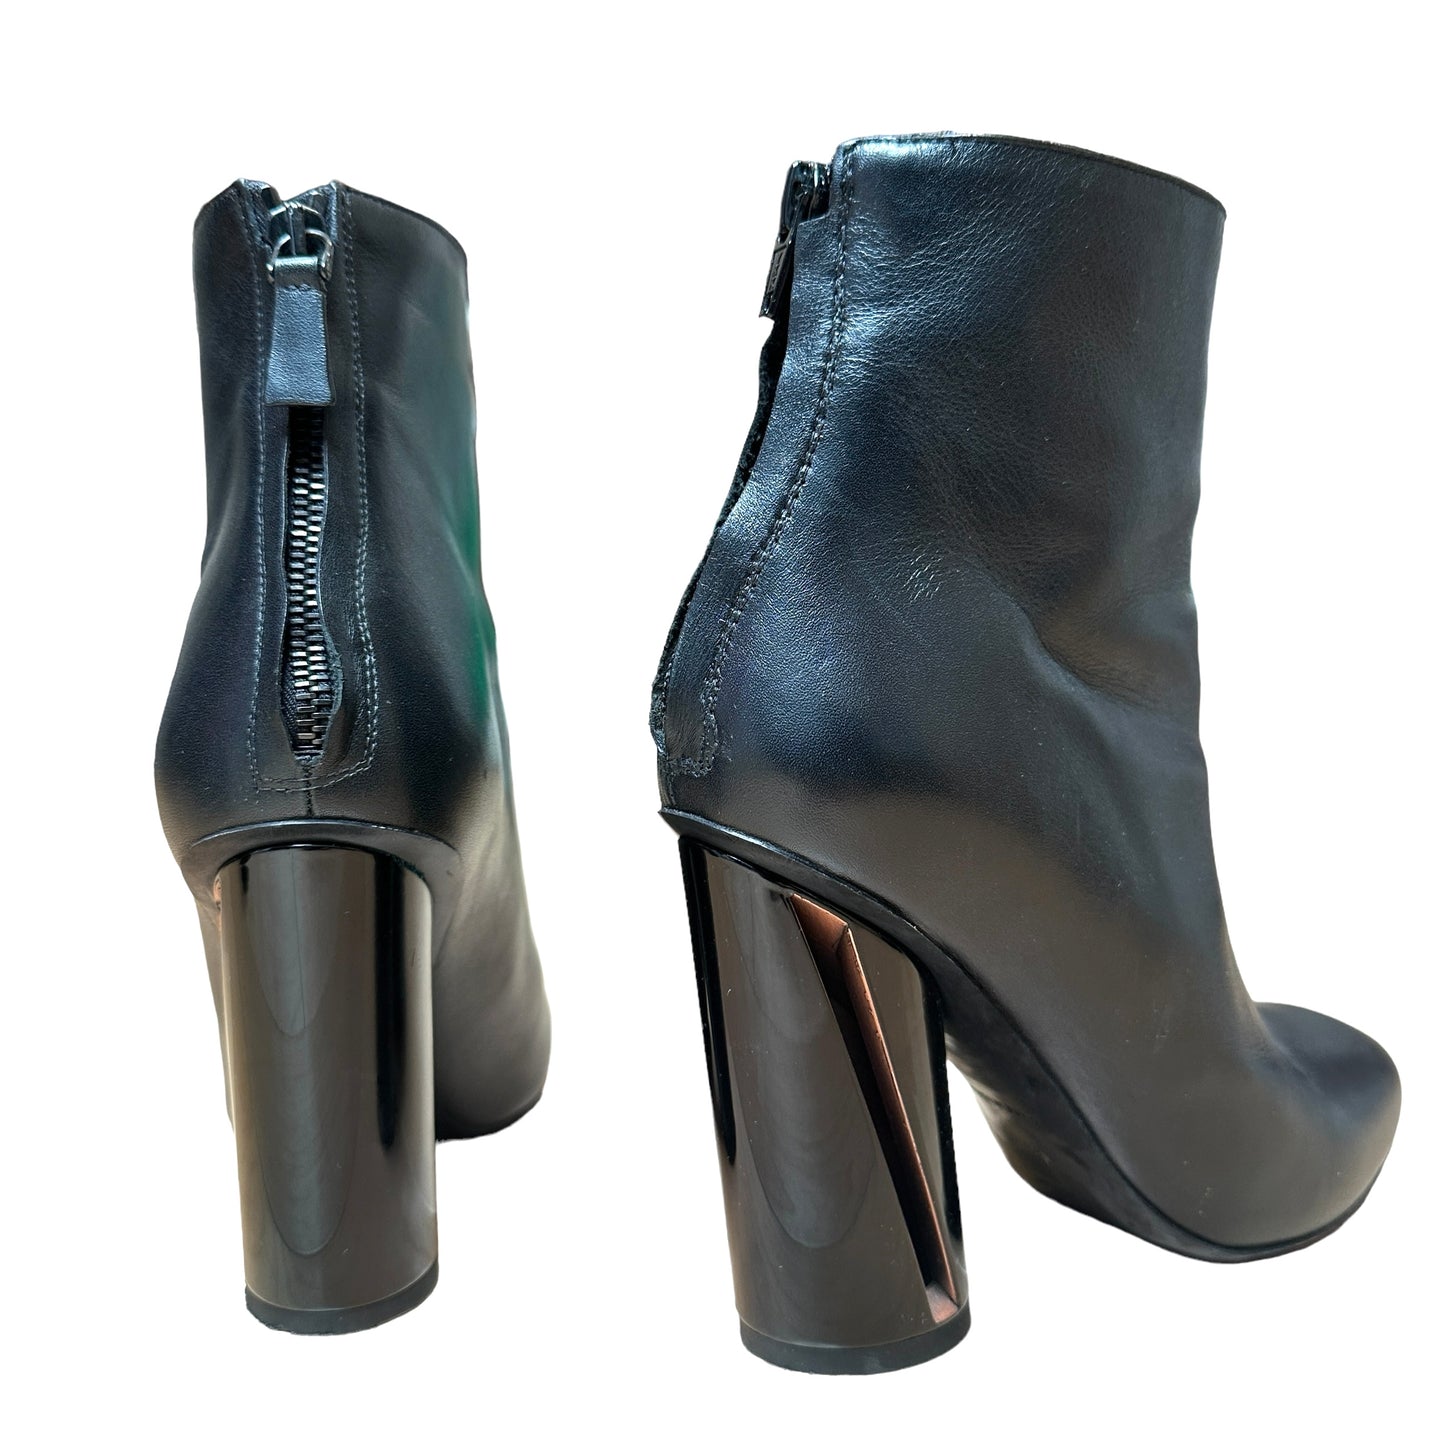 Black Leather Heeled Boots - 8